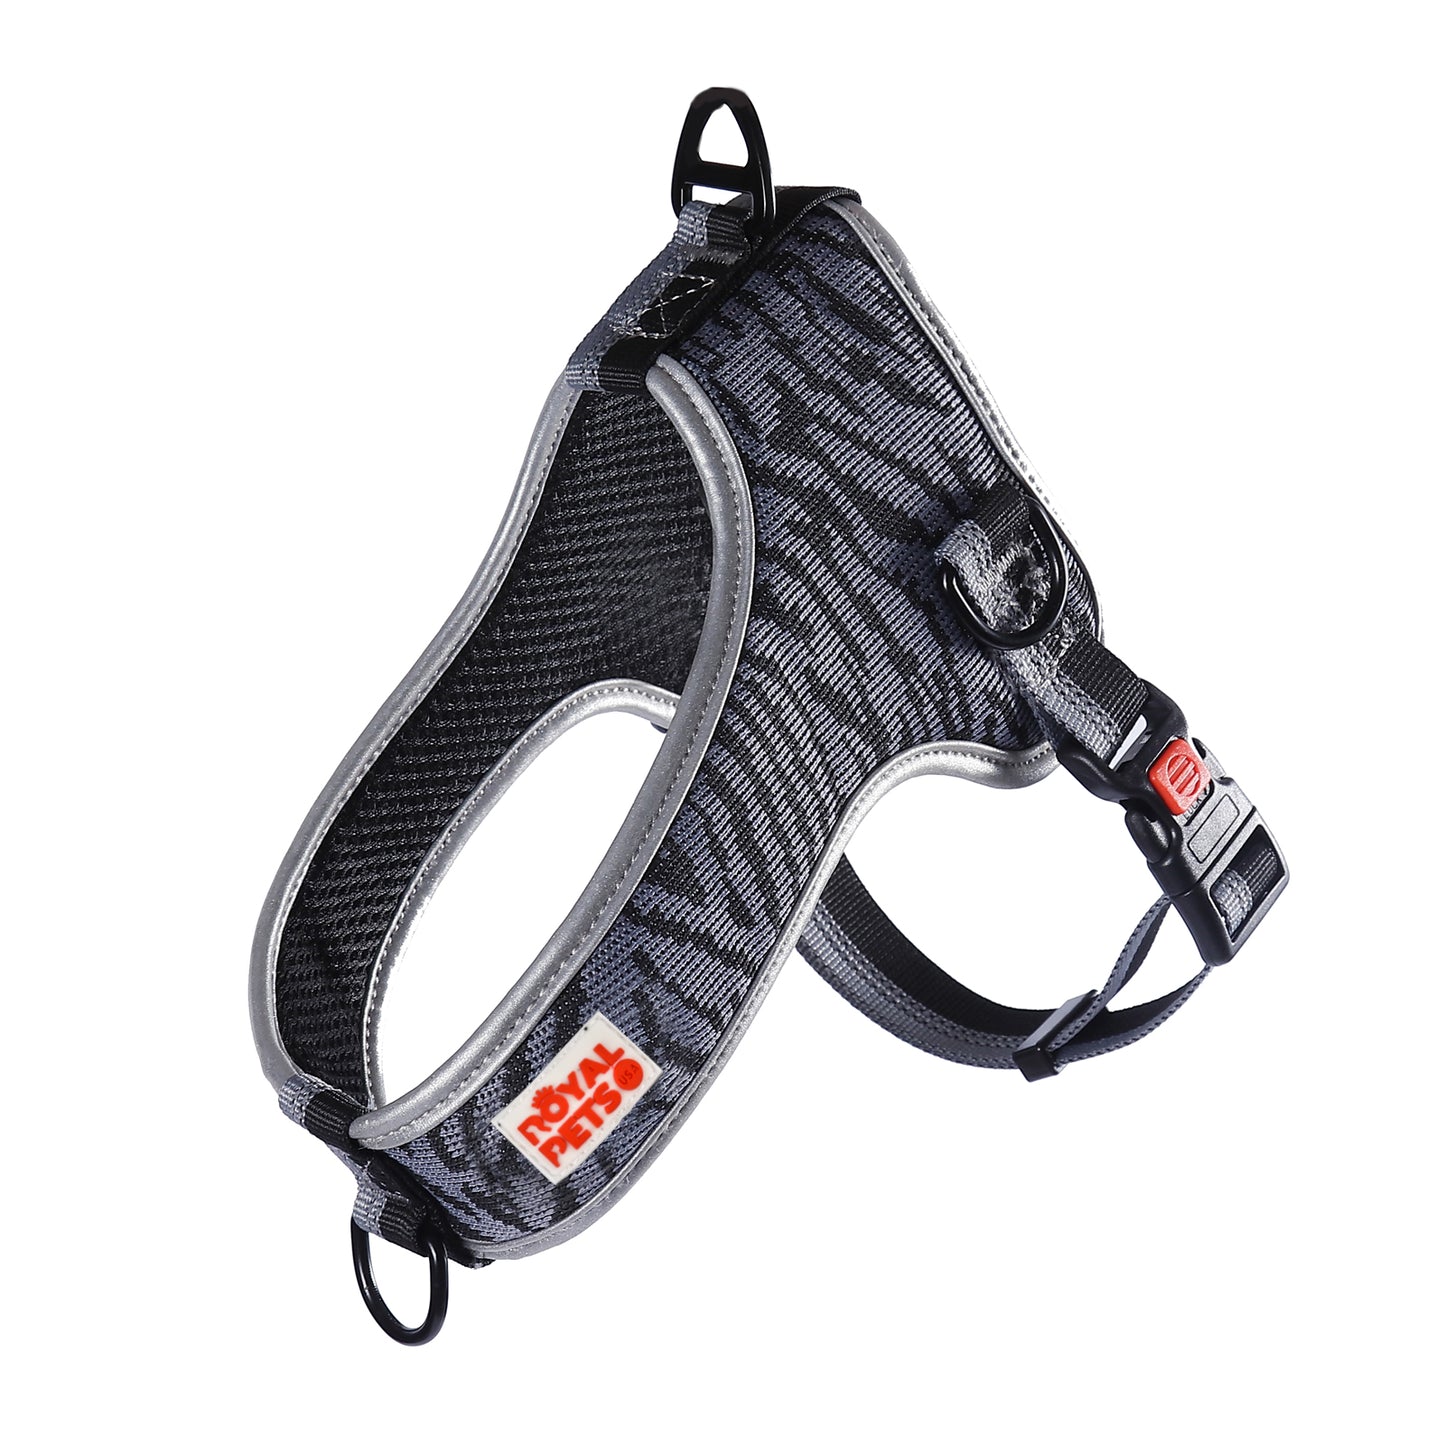 Royal Pets U-shaped Tiger Series Pet Harness with No Pull Tactical Reflective Dog Vest